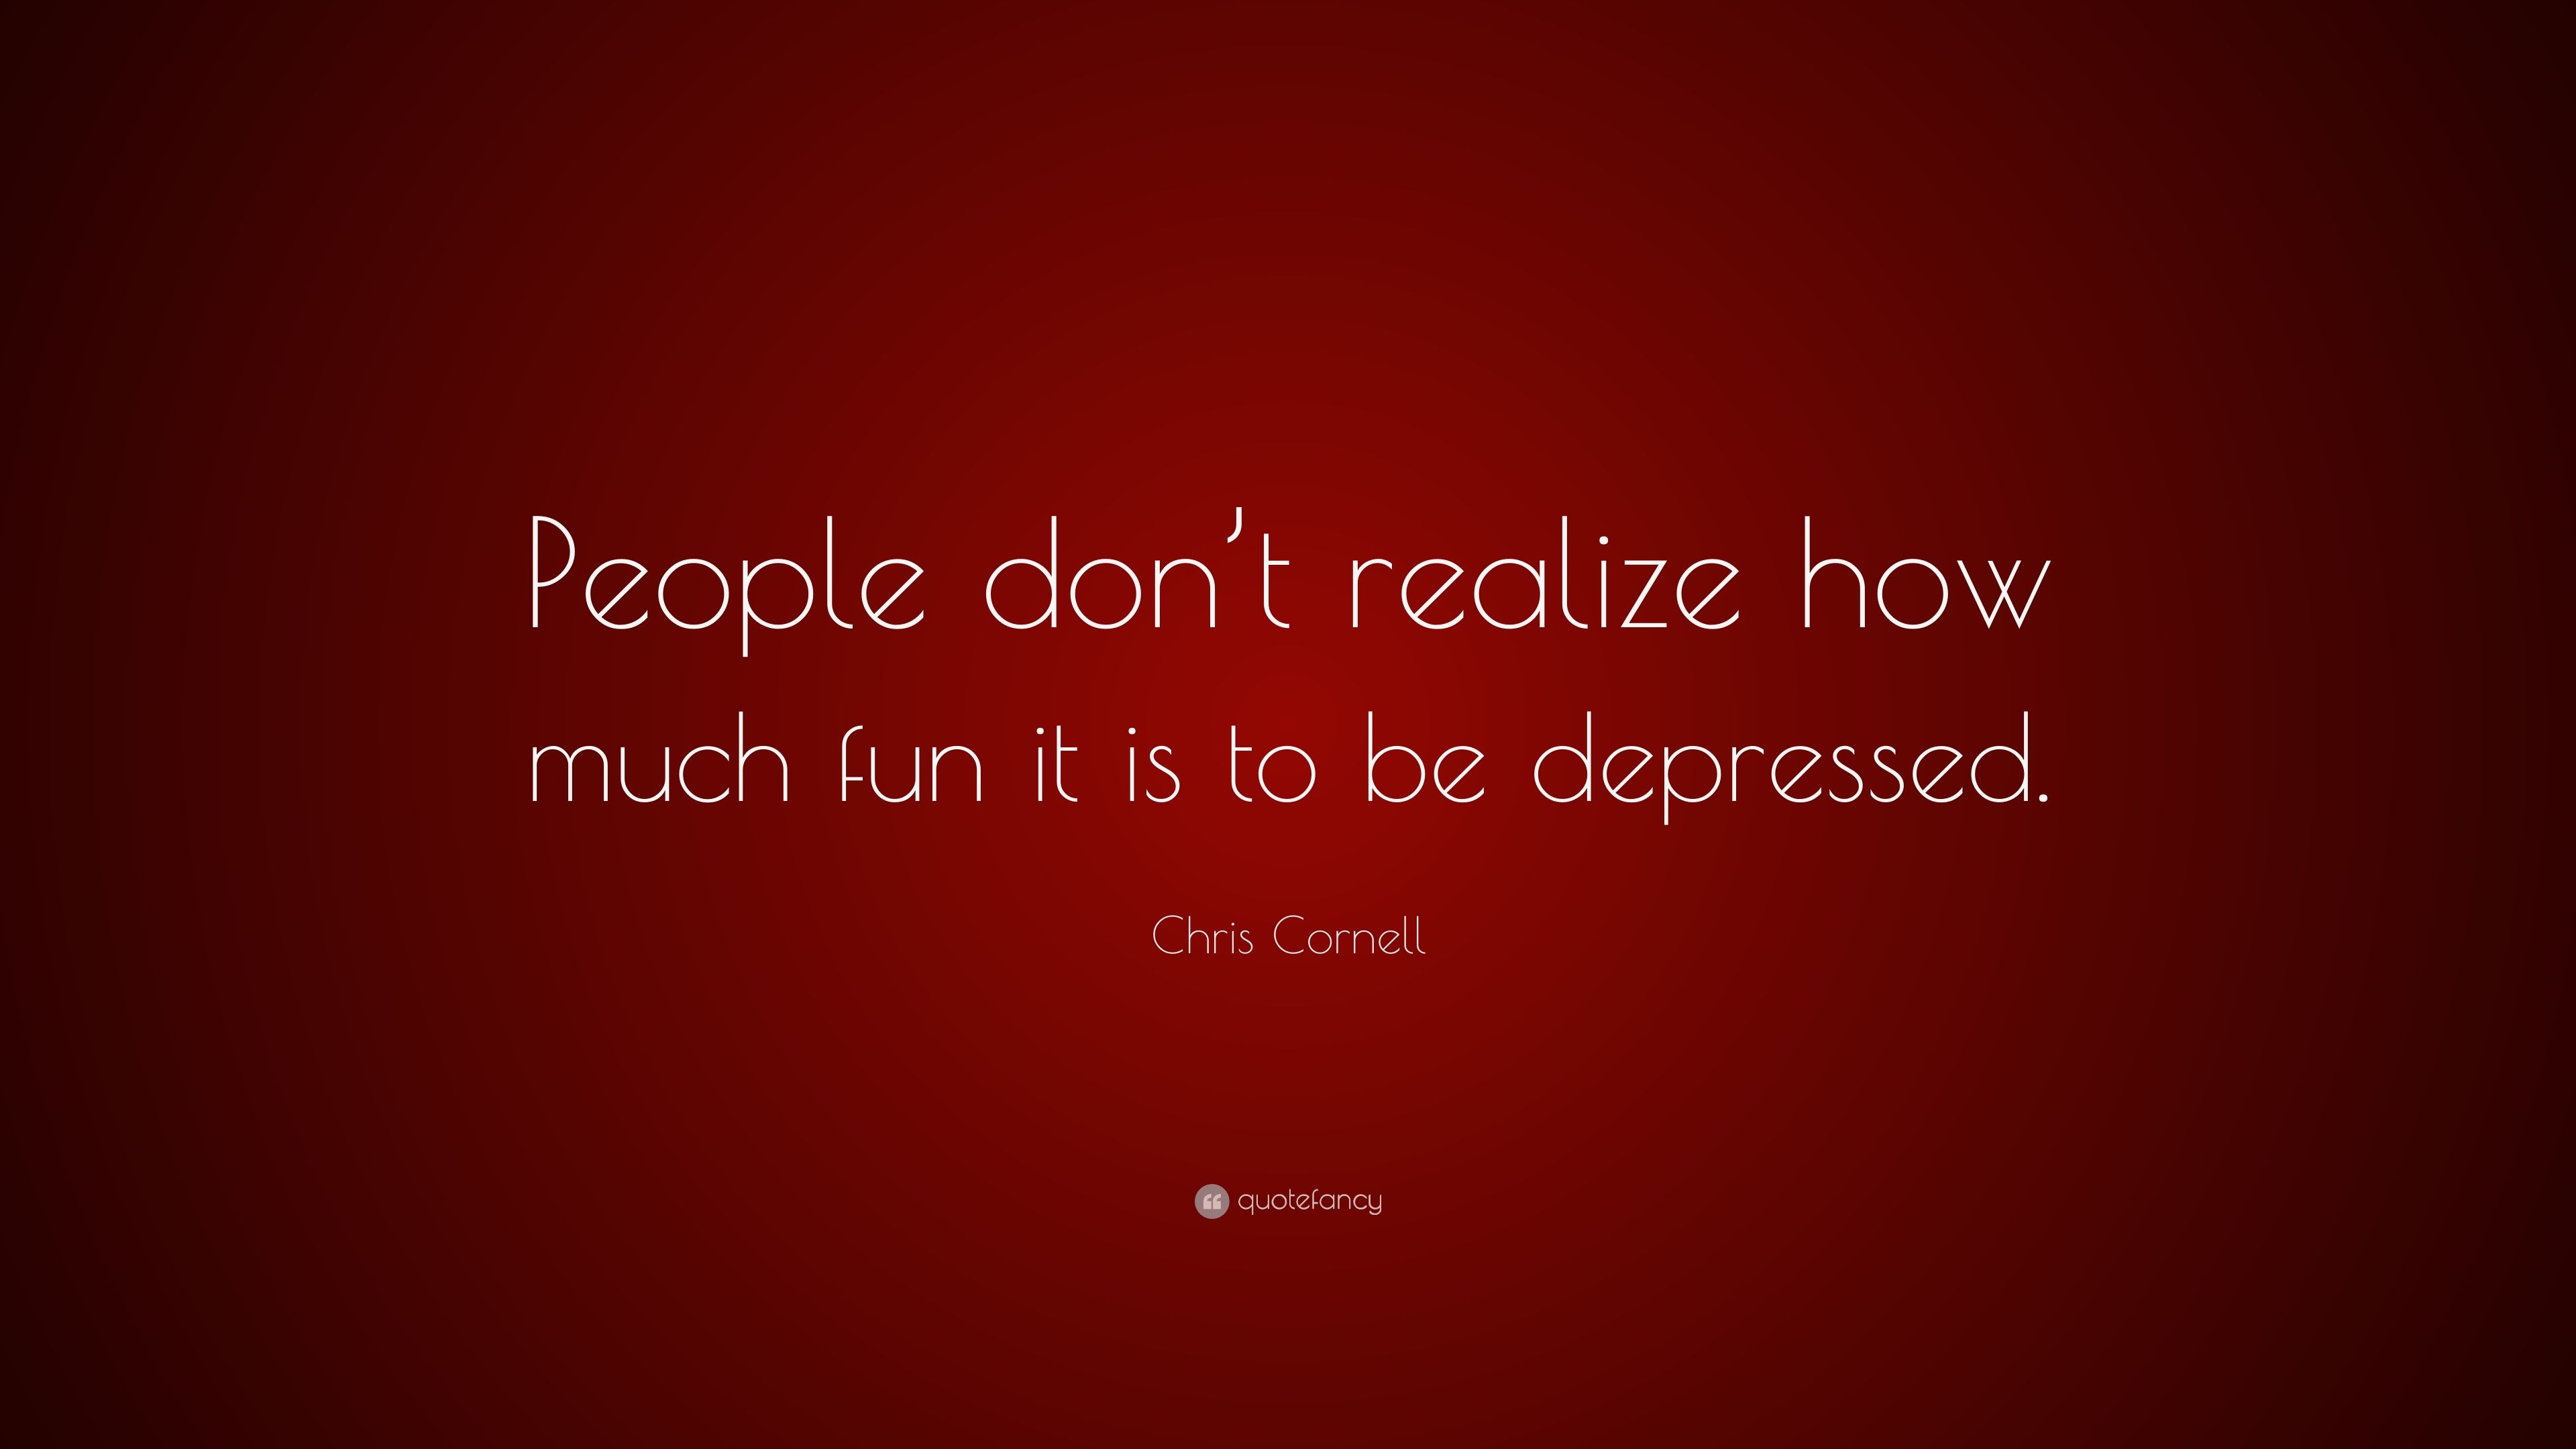 Chris Cornell Quote: “People don't realize how much fun it is to